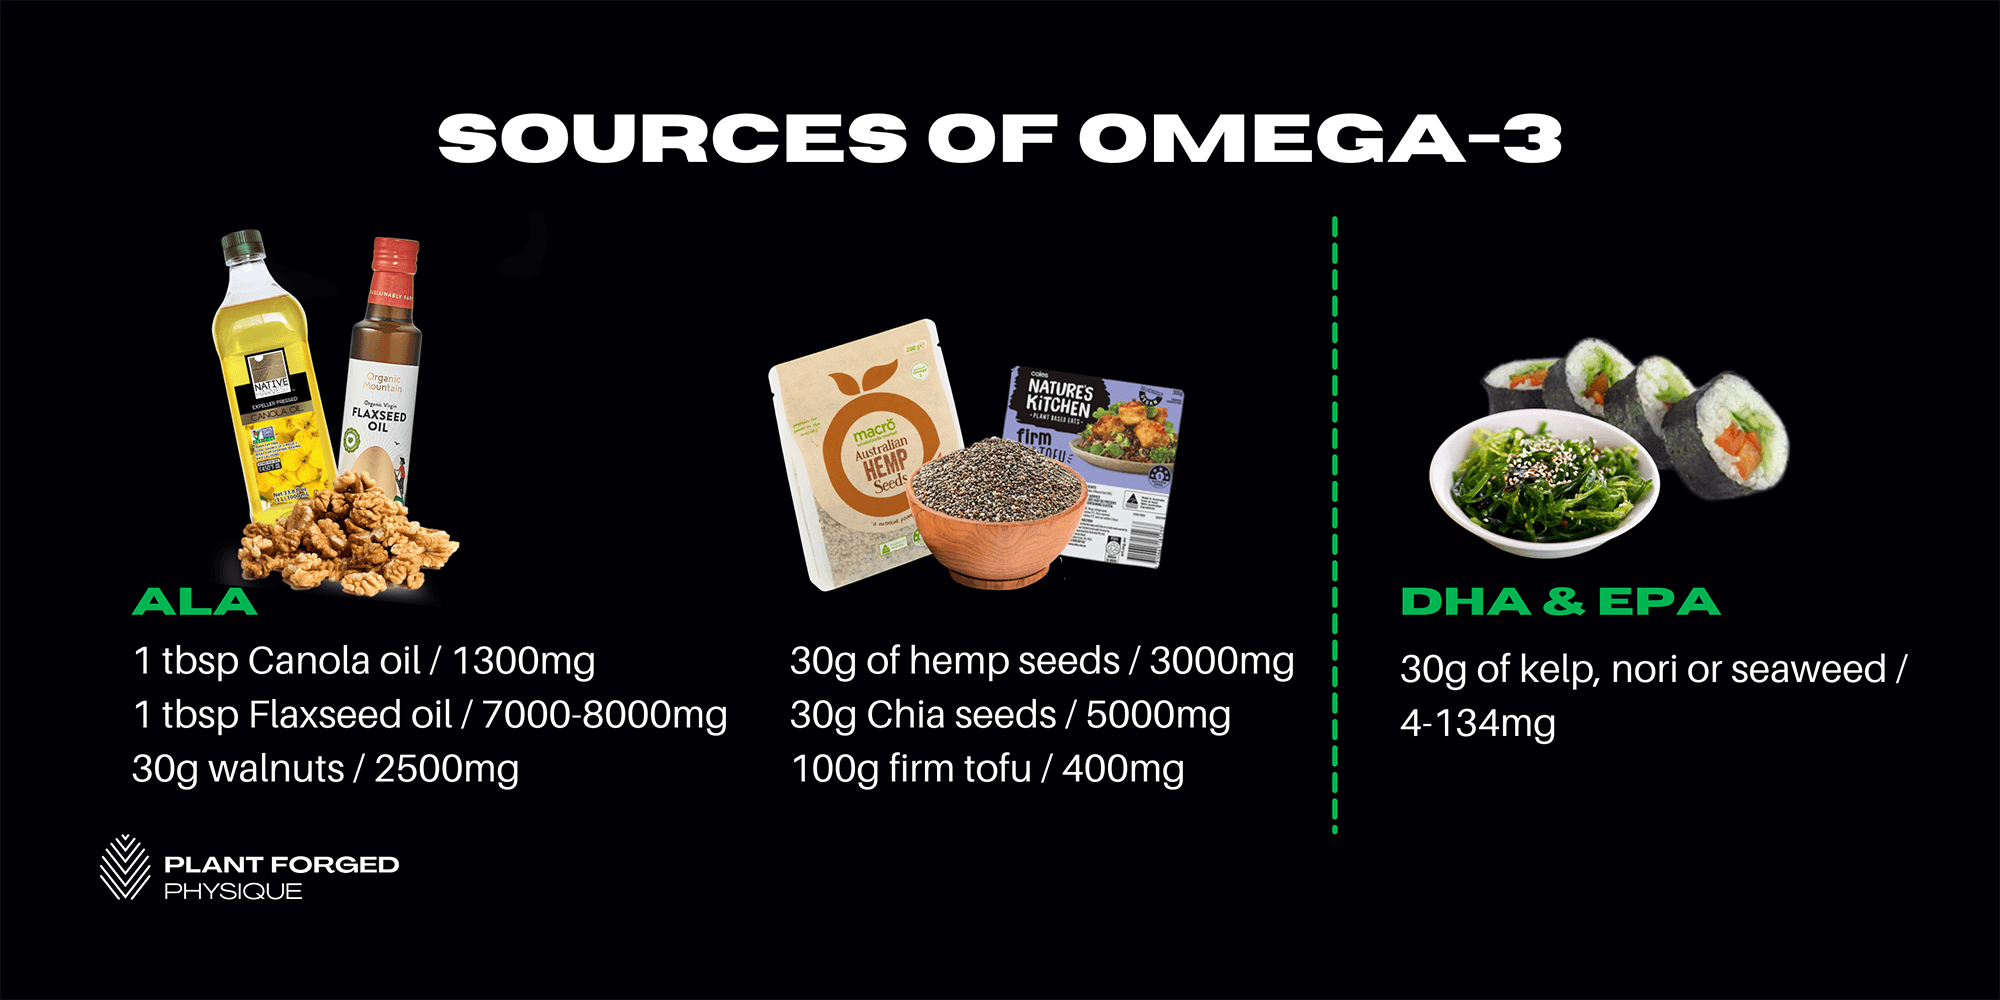 Sources of omega-3